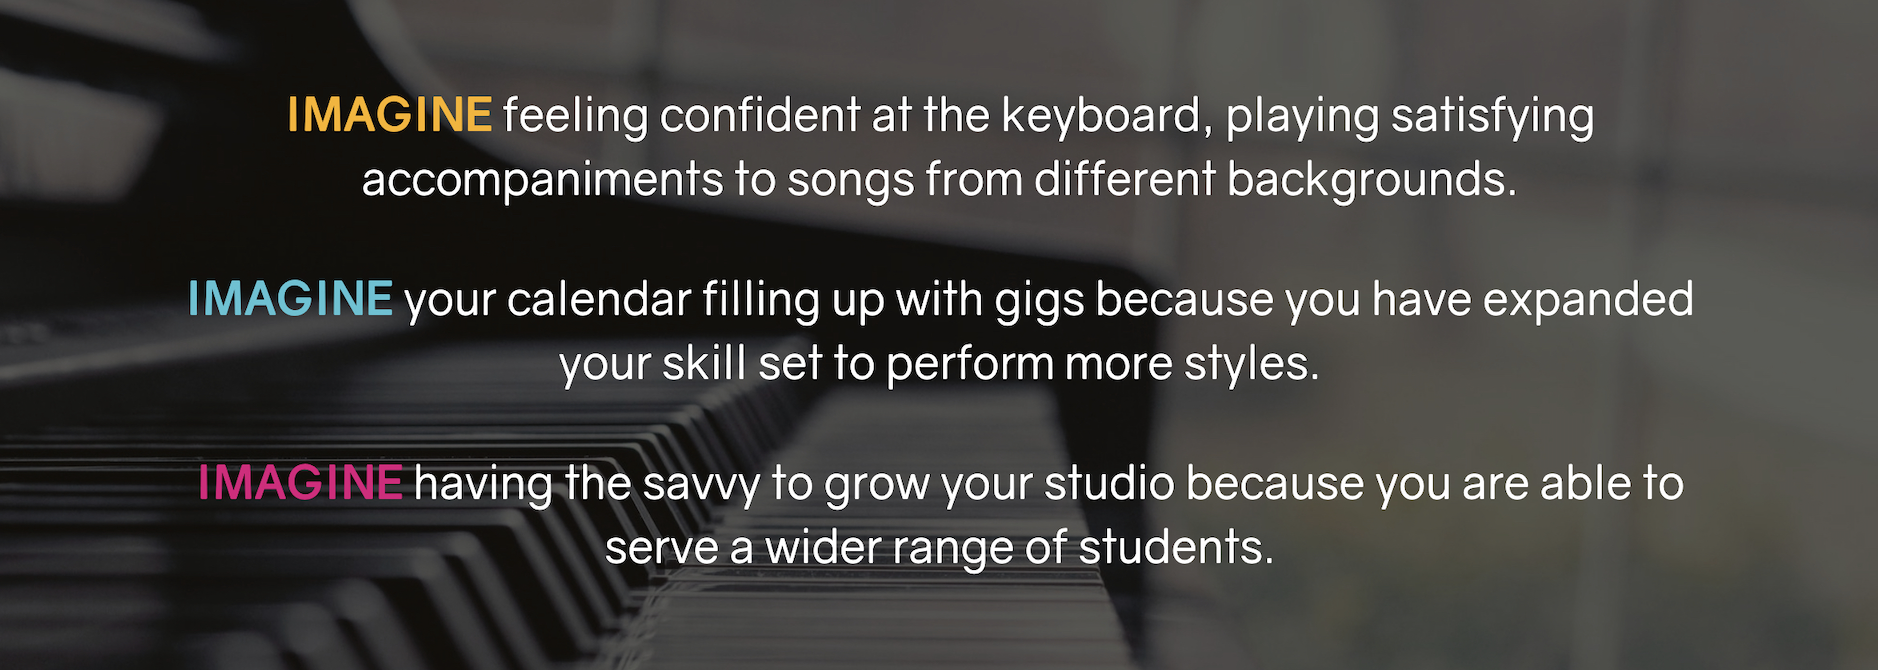 Imagine feeling confident atet keyboard, playing satisfying accompaniments to songs from different backgrounds.  Imagine your calendar filling up with gigs because you have expanded your skill set to perform more styles.  Imagine having the savvy to grow your studio because you are able to serve a wider range of students.